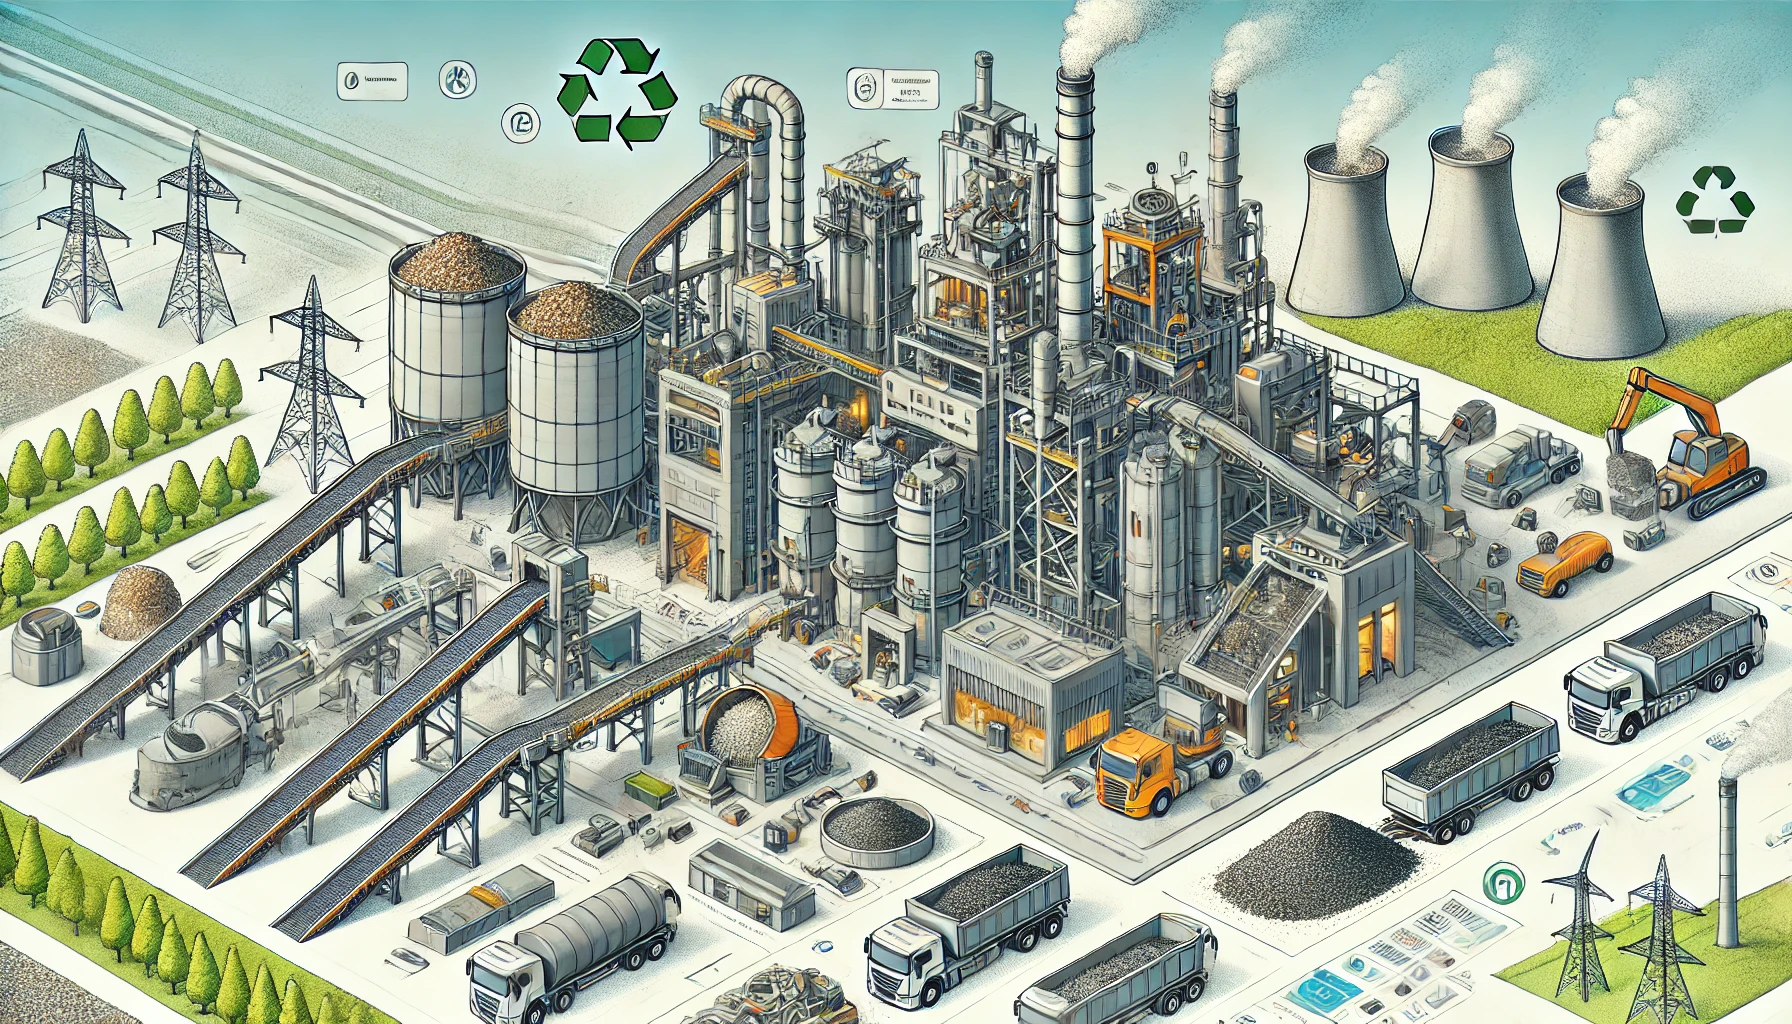 Transforming Waste into Energy: The RDF Process at Ferrybridge Multifuel Plant with EFR Skips